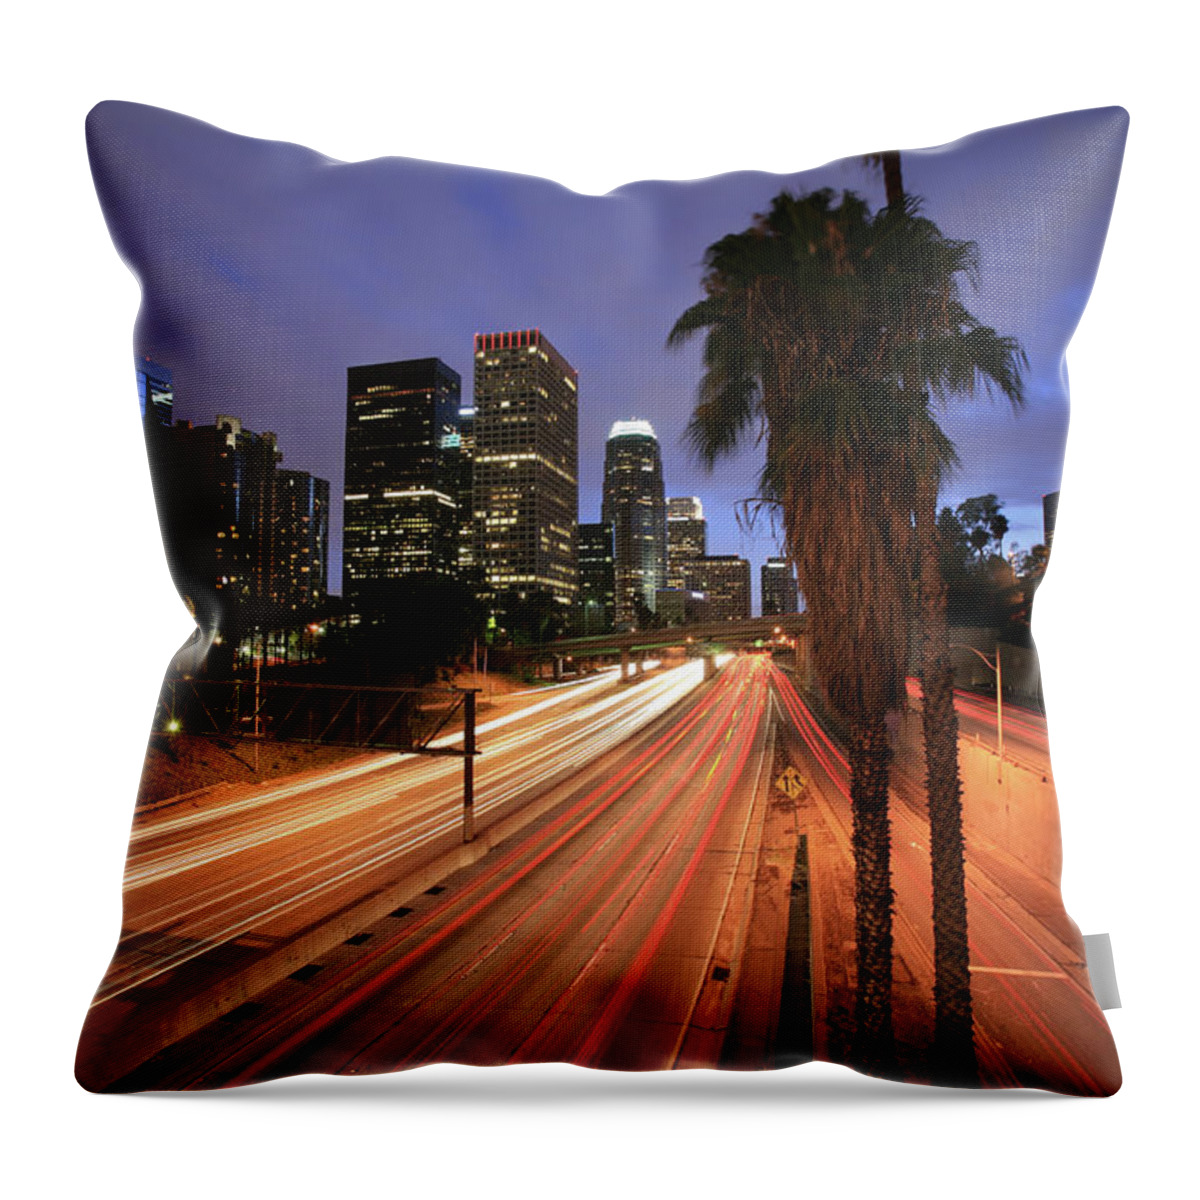 Working Throw Pillow featuring the photograph Busy La Freeway At Night by Ekash